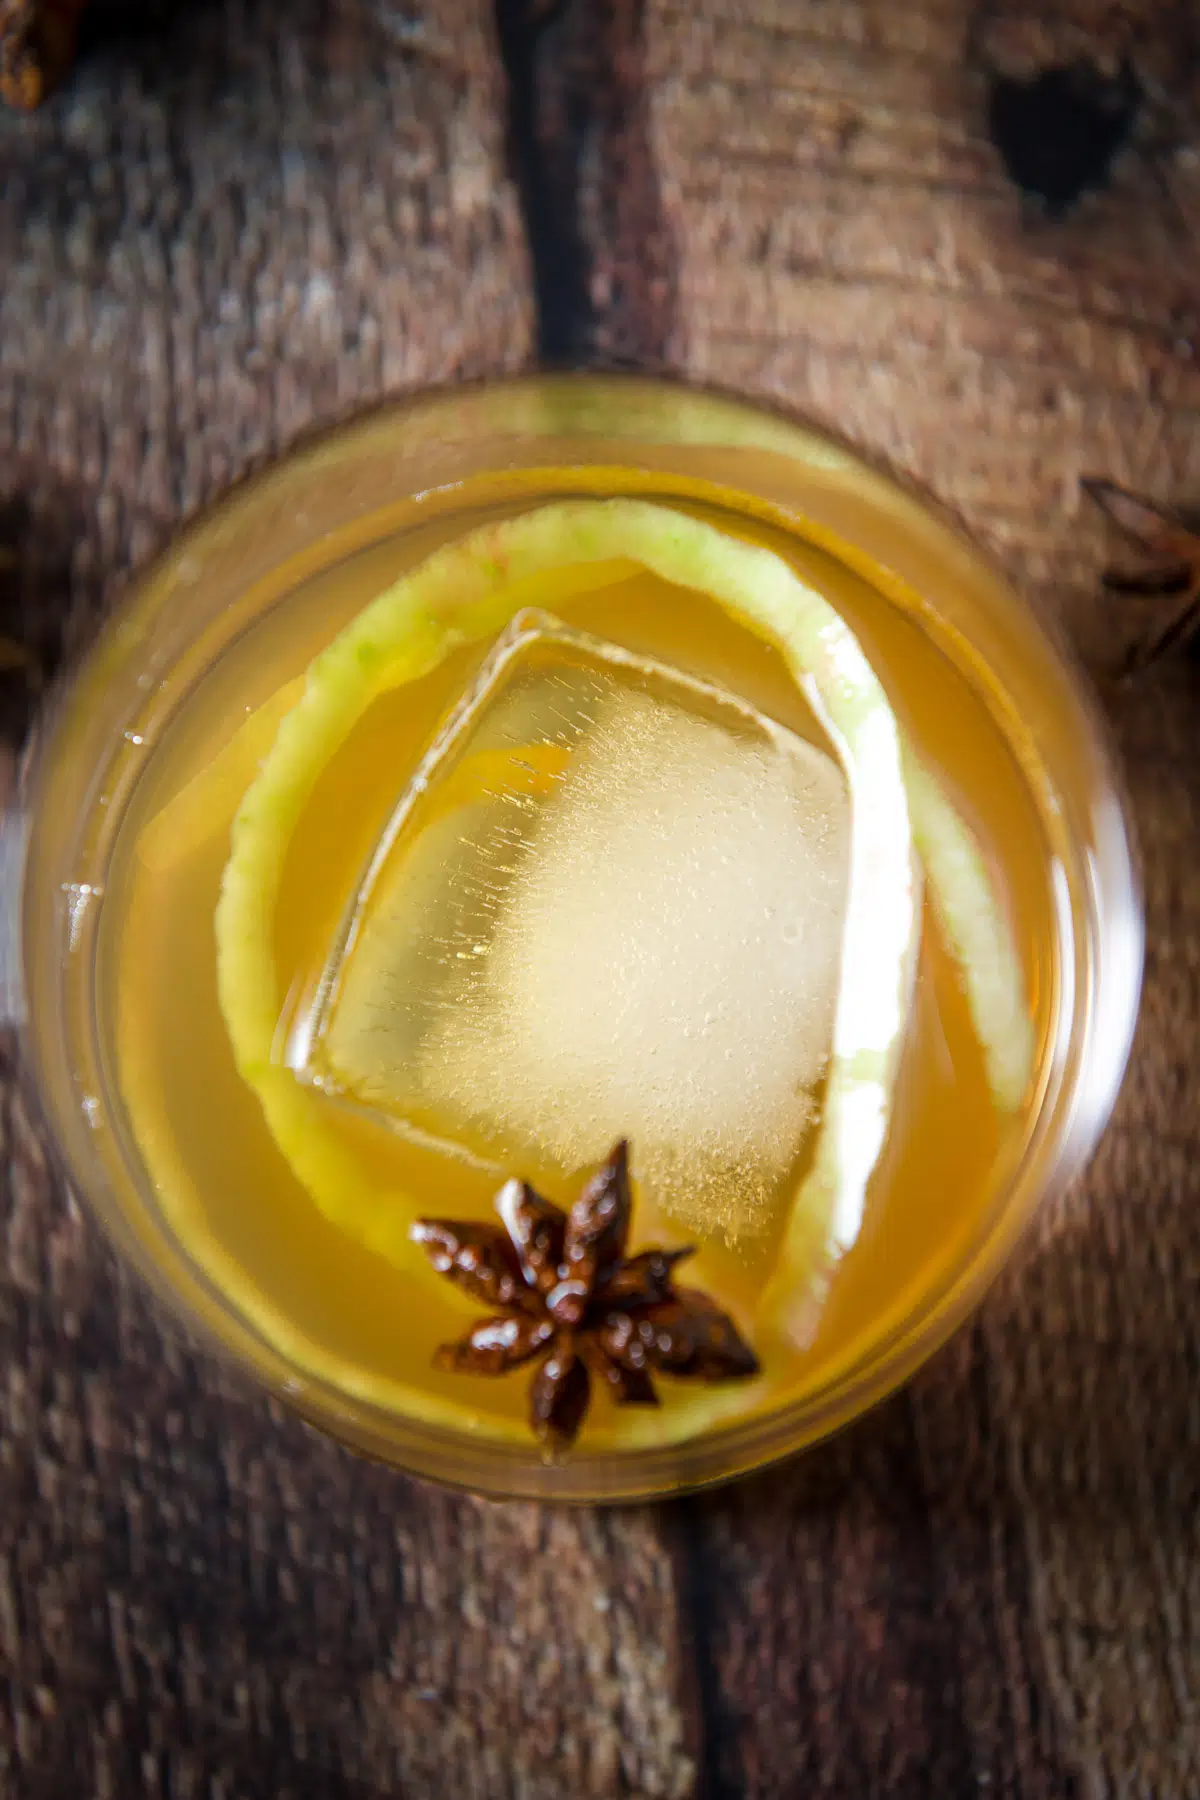 Overhead view of the apple cocktail with a big ice cube and star anise floating